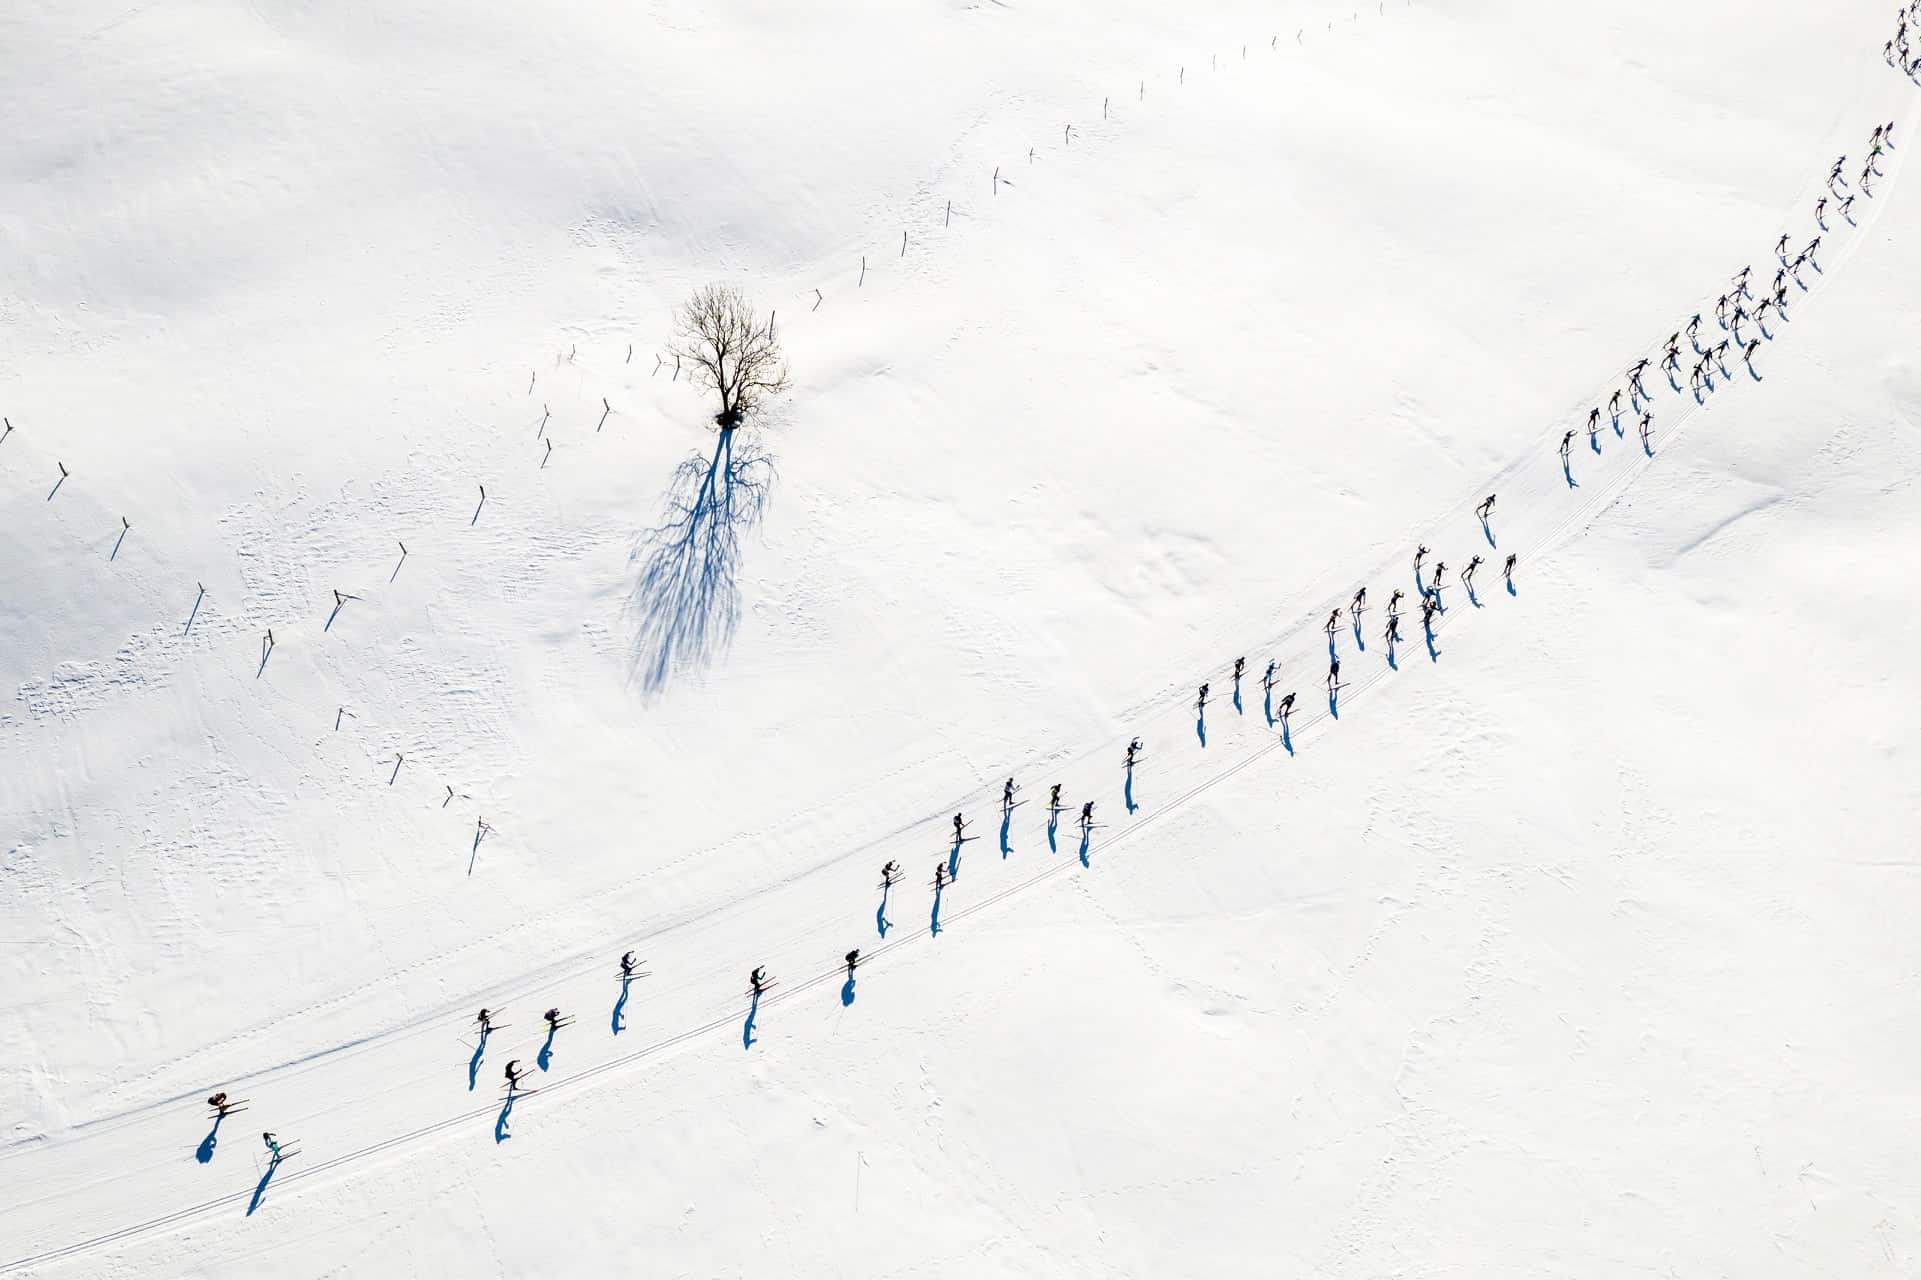 The Transju 2022 cross-country ski race in France with snow